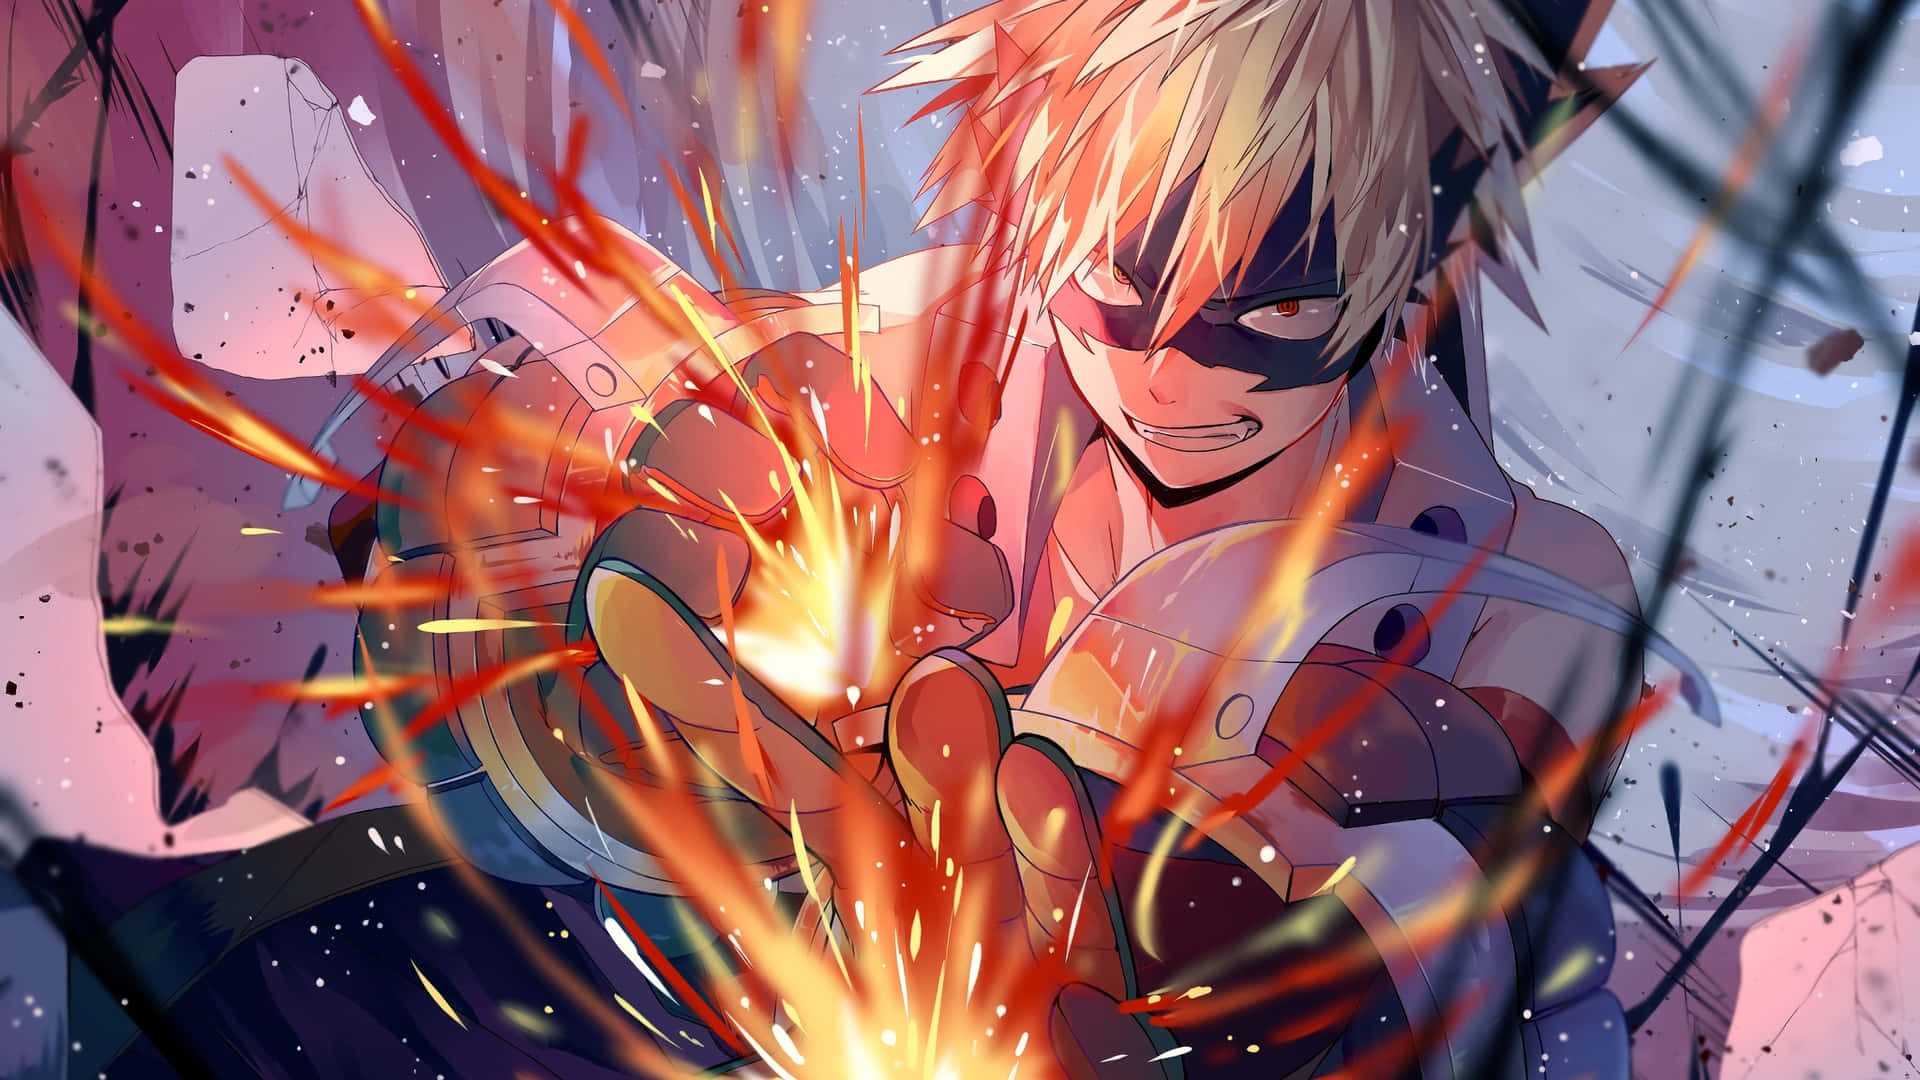 Bakugou Stands Determined Against A Fiery Background Background